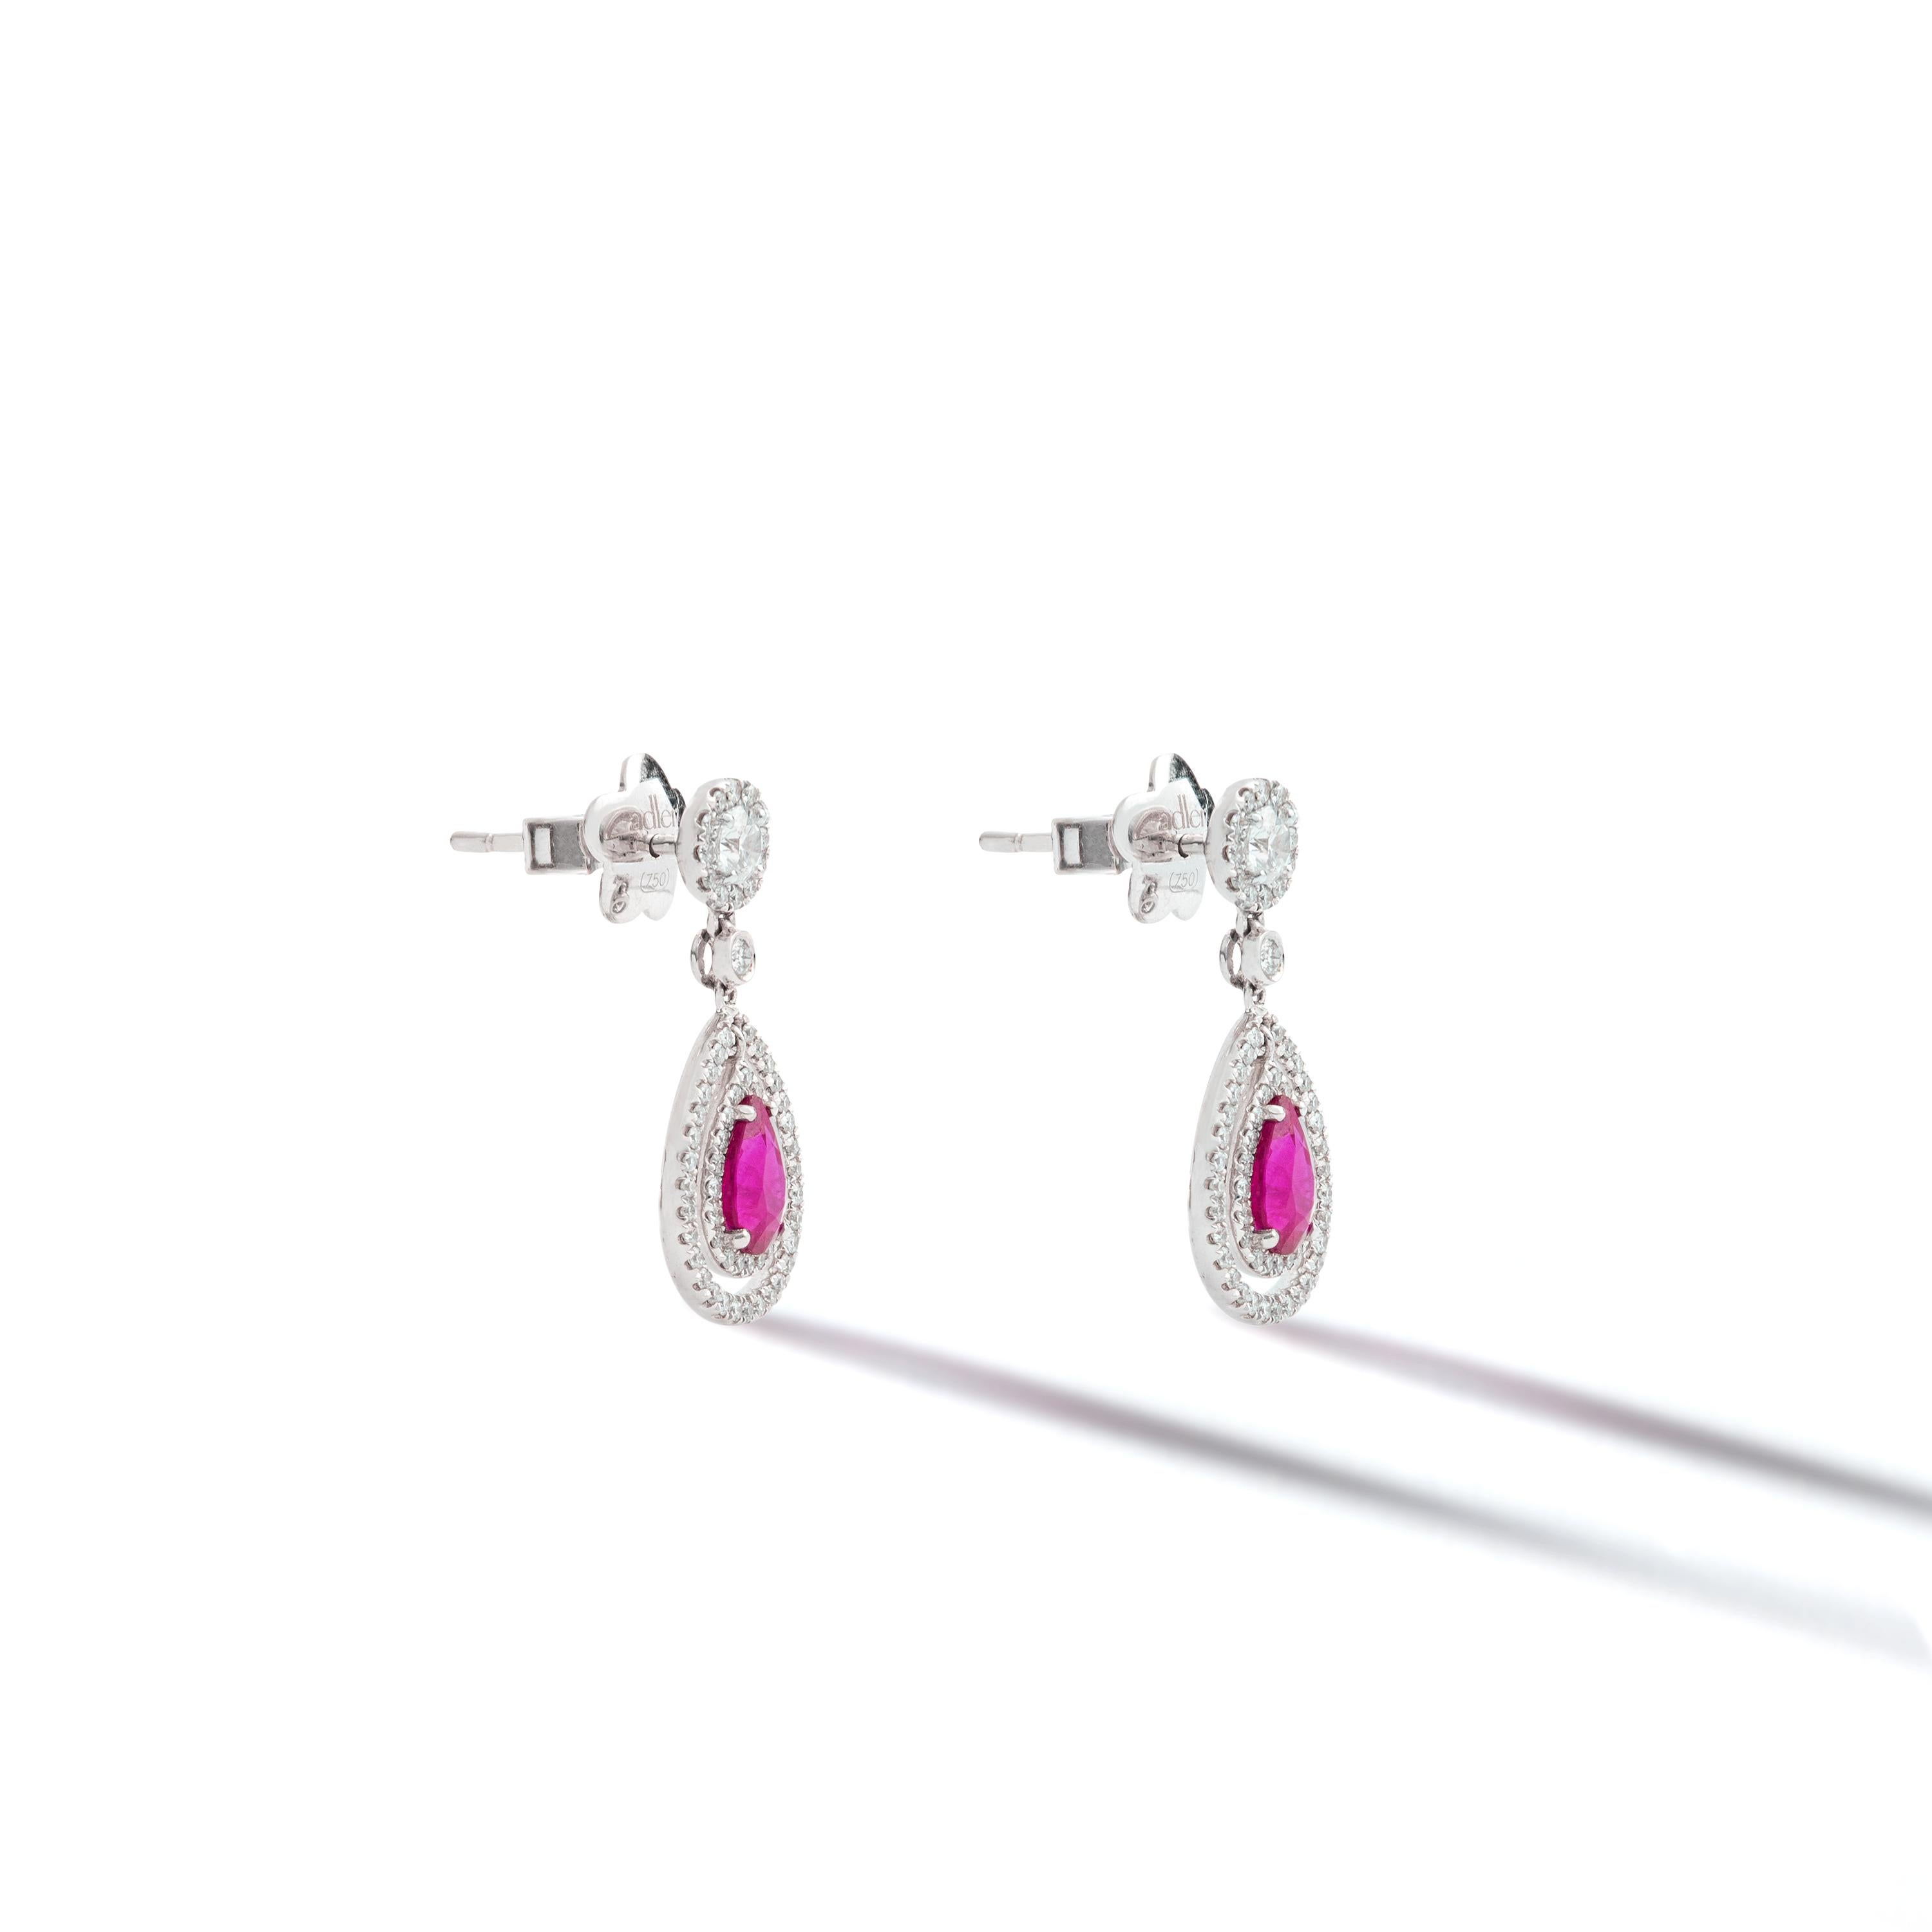 Ruby and Diamond on white Gold Earrings.
Signed Adler.
Contemporary.